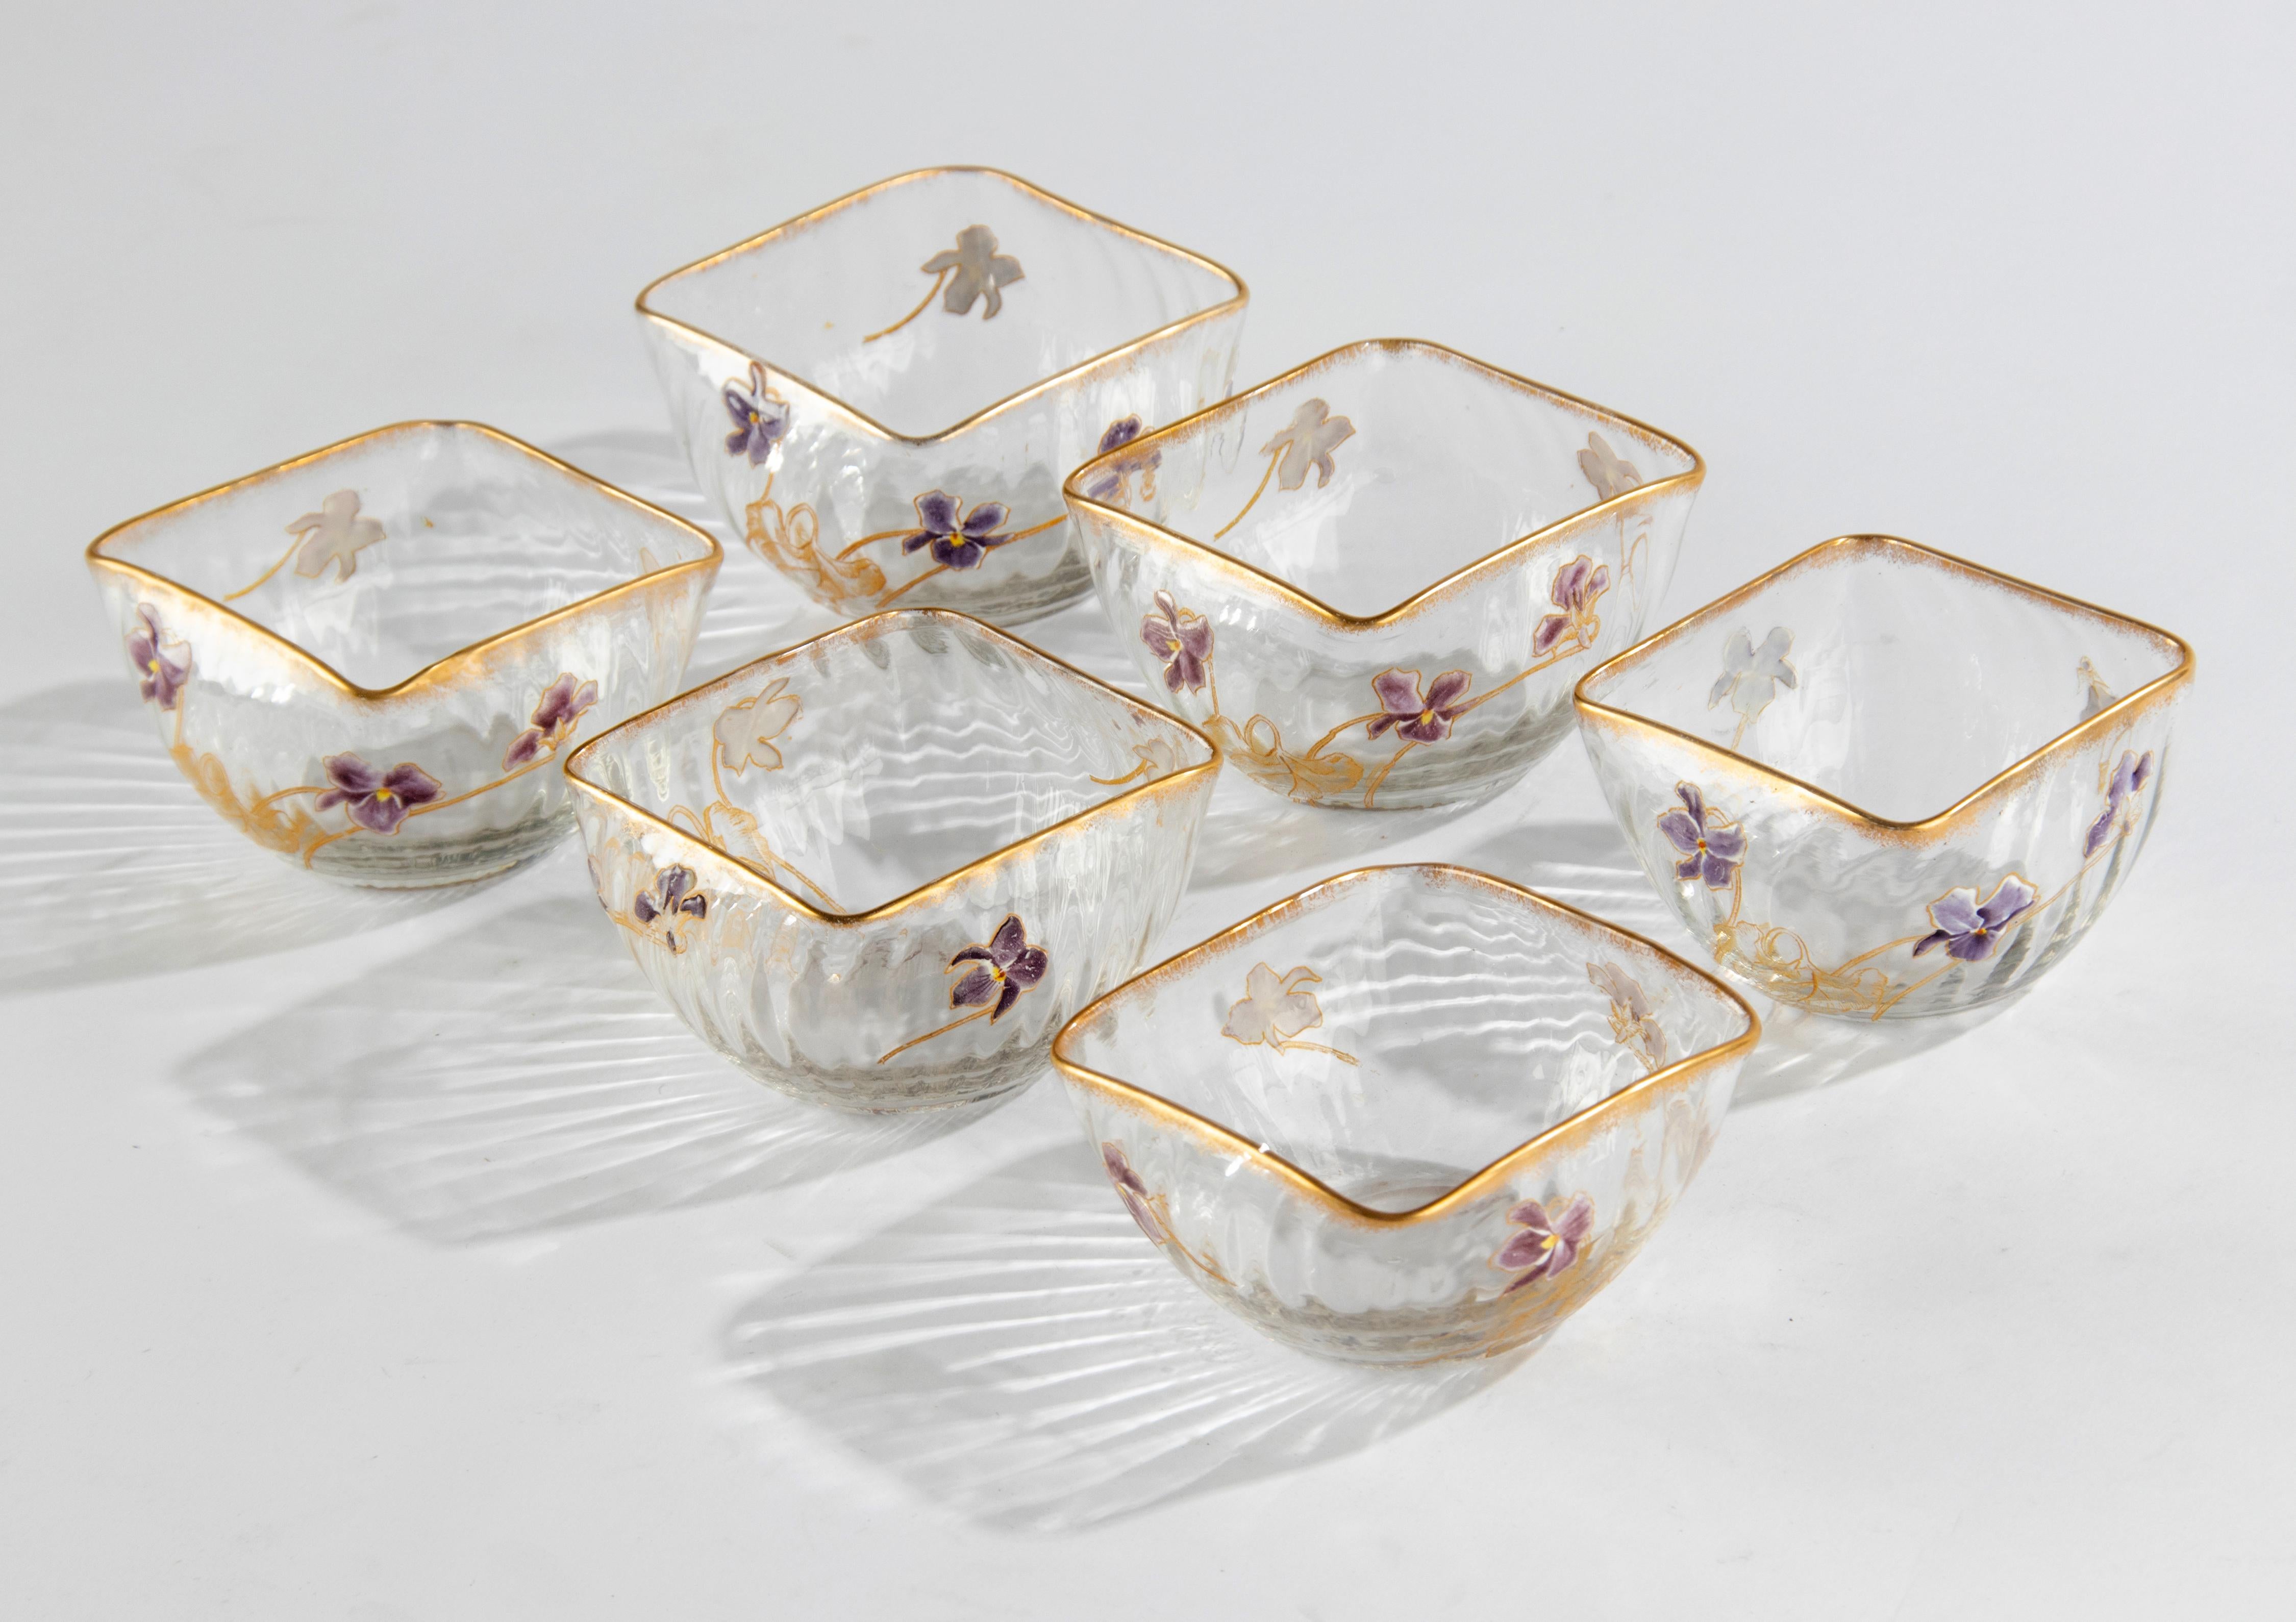 Late 19th Century Set of 6 Crystal Art Nouveau Bowls Hand Painted with Flowers Attr. to Daum Nancy For Sale